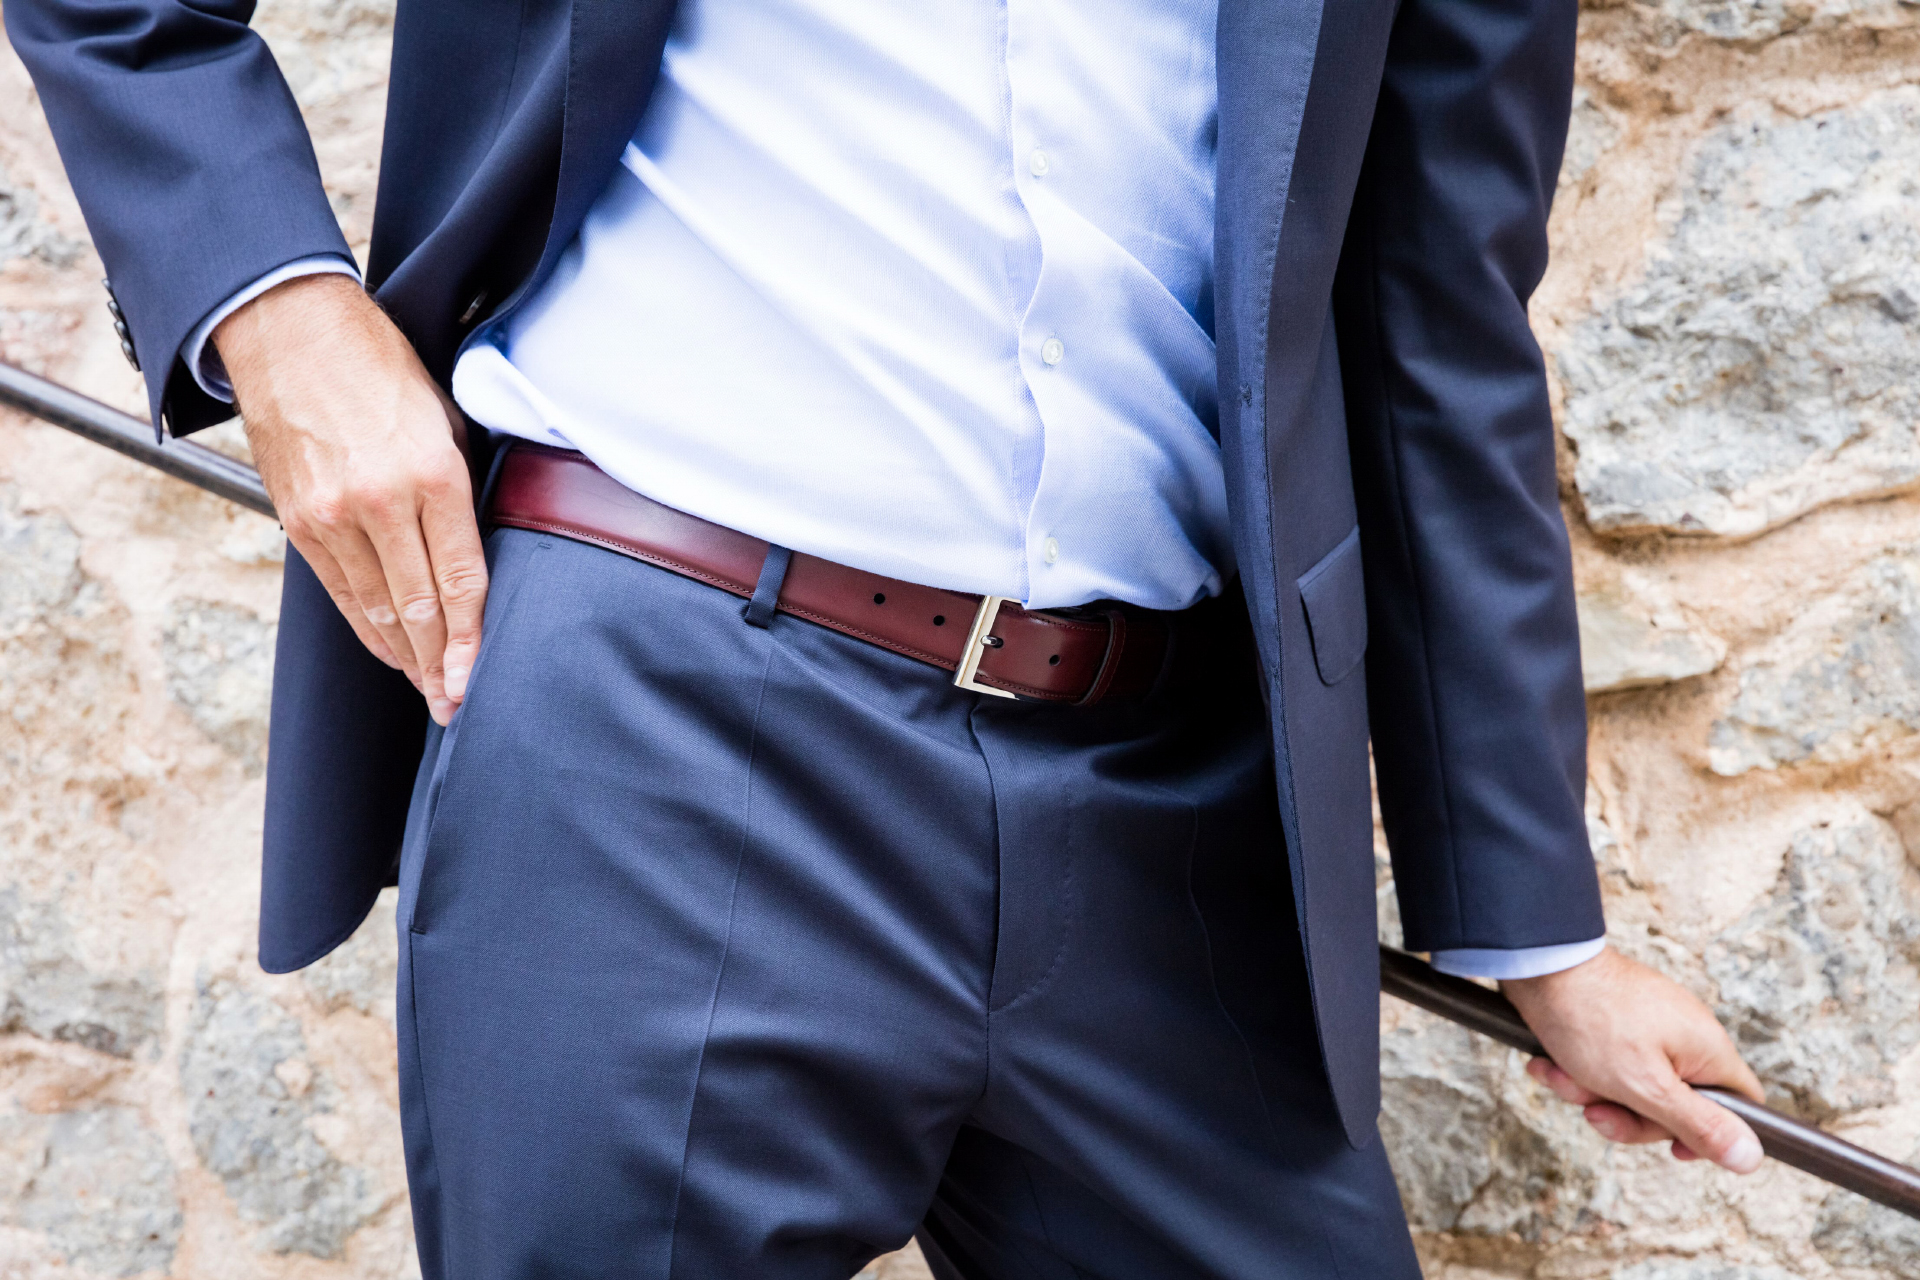 Can I wear a brown belt with black pants? - Quora